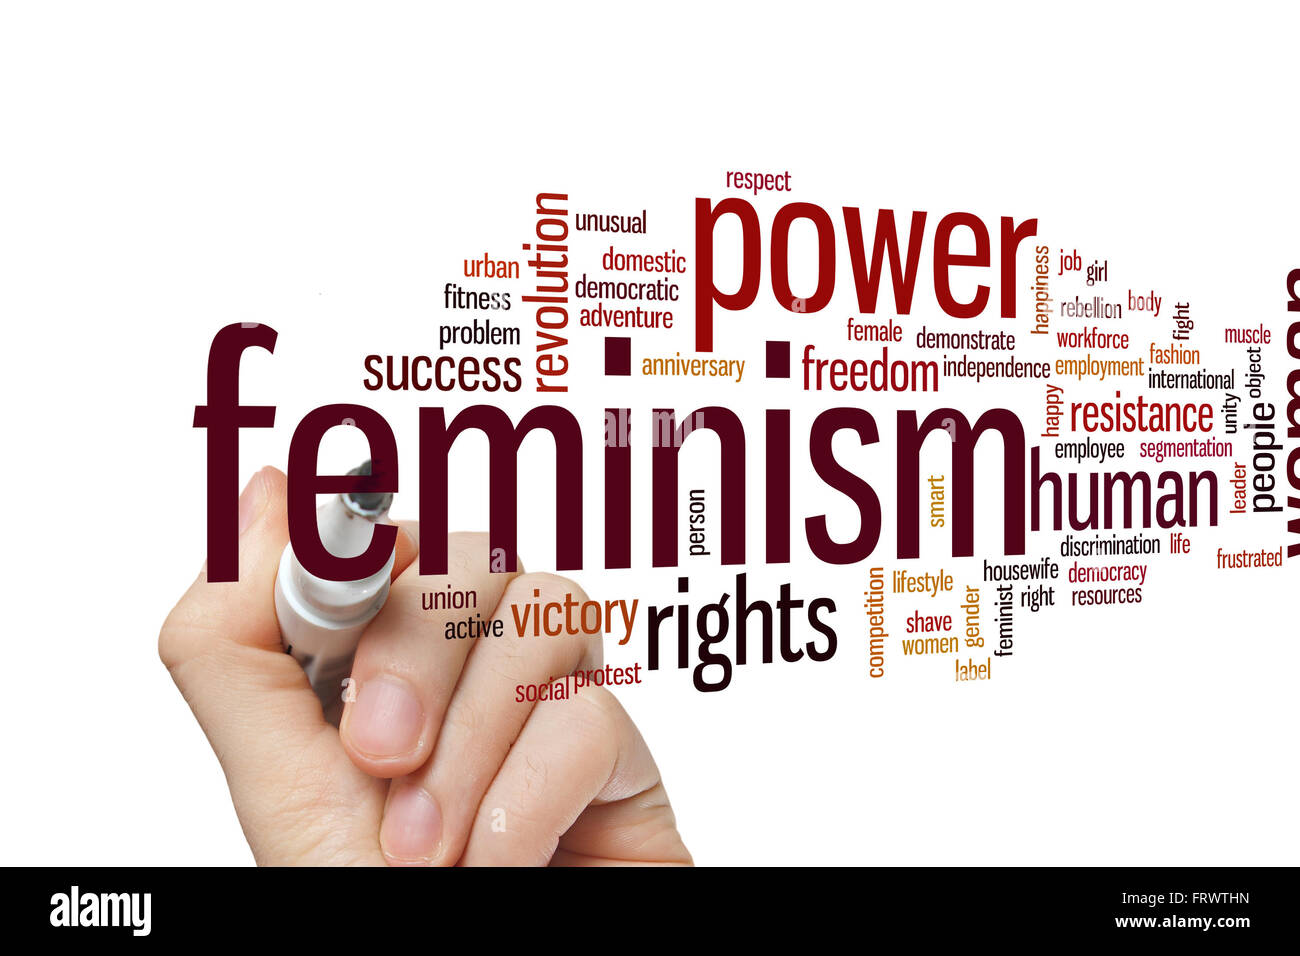 Feminism concept word cloud background Stock Photo